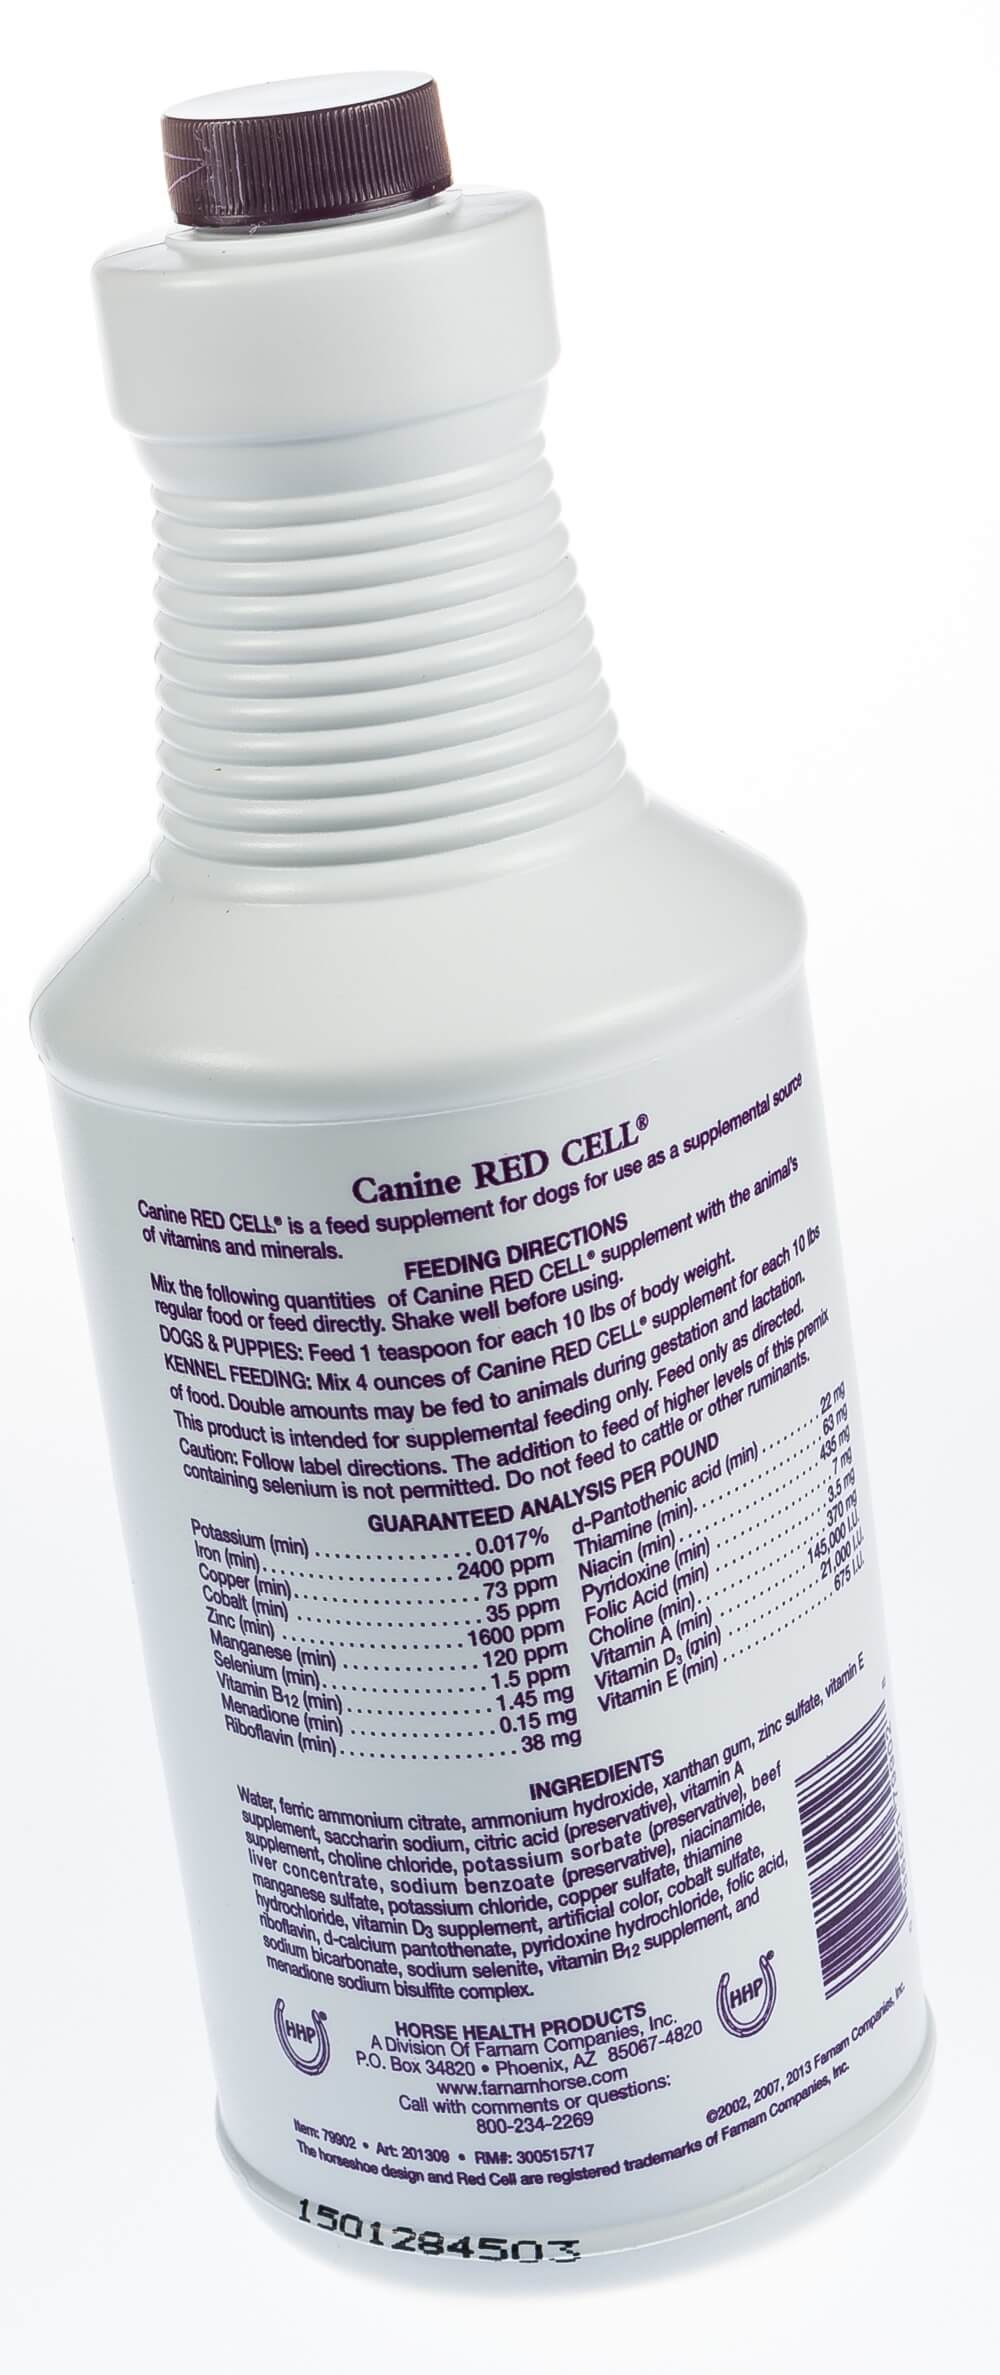 Canine Red Cell, qt | eBay